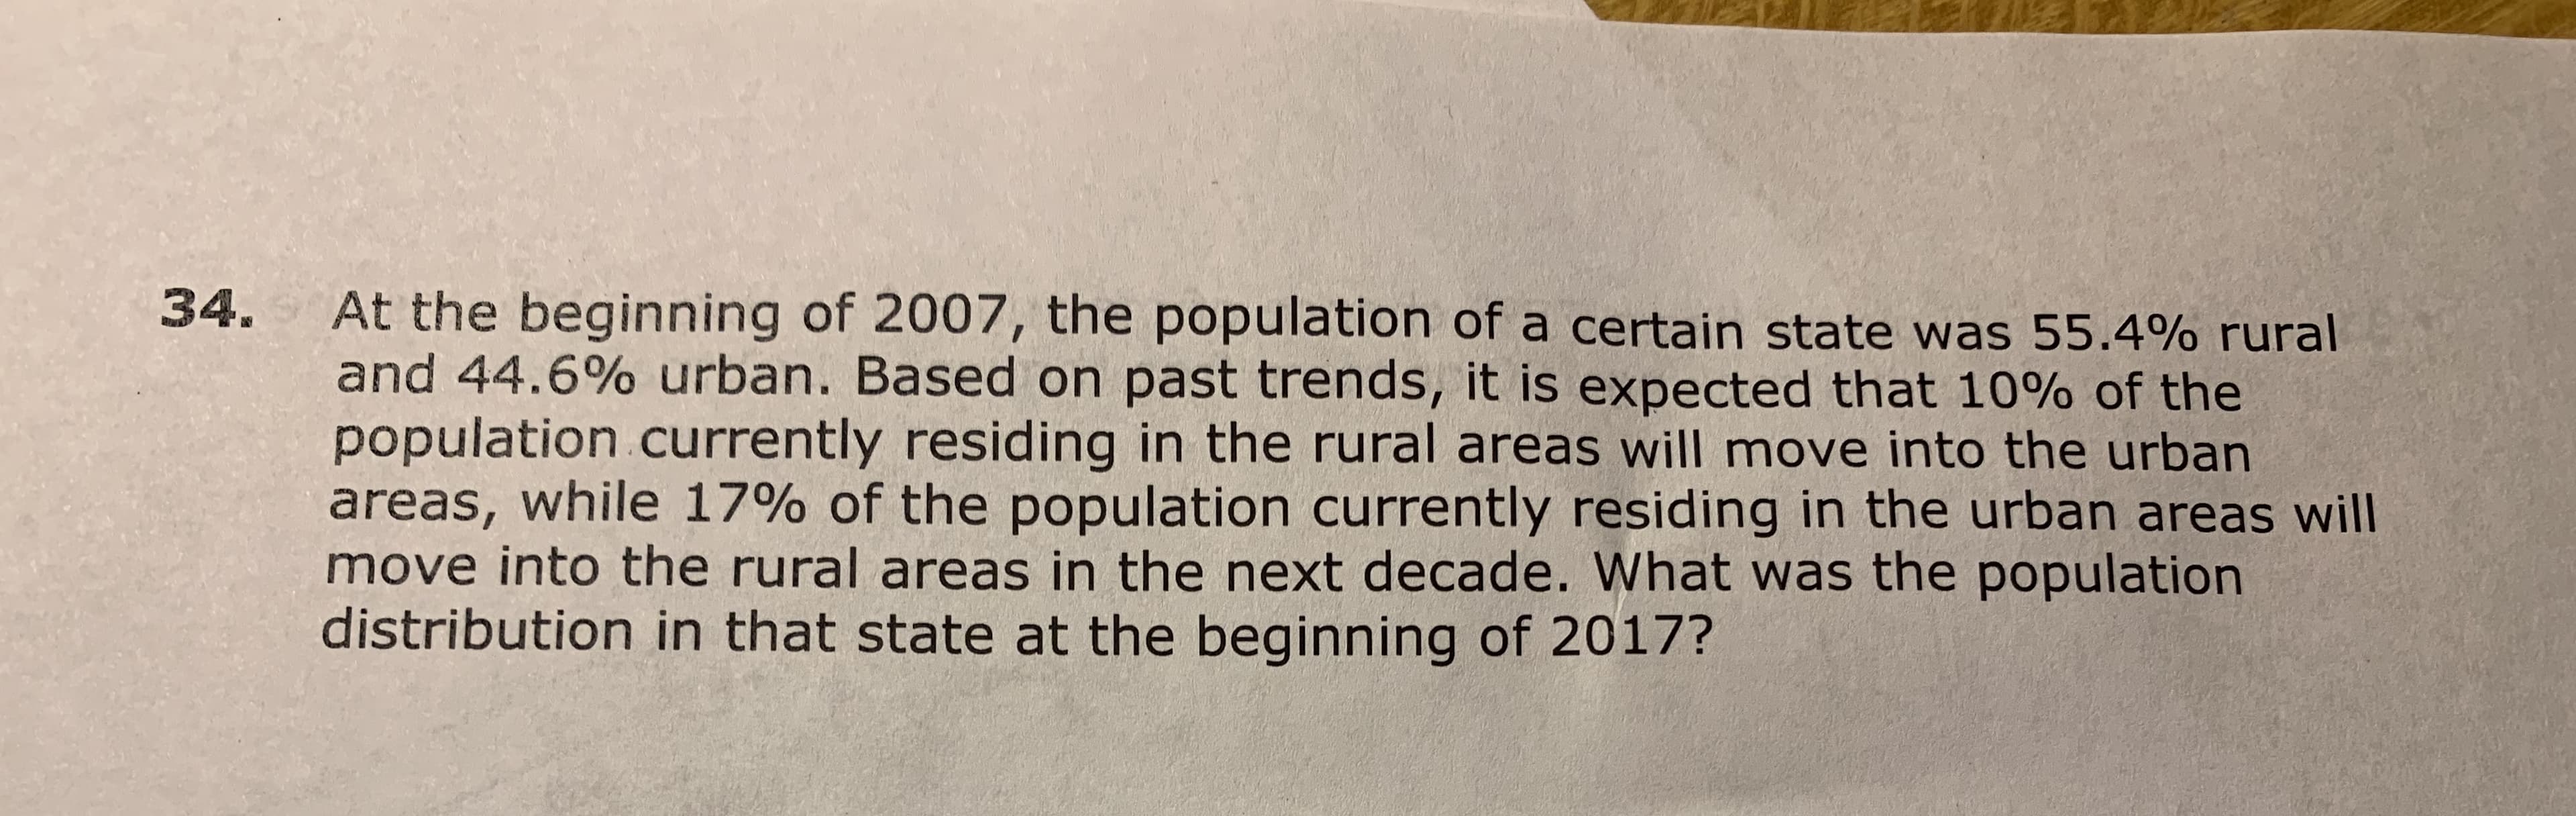 At the beginning of 2007, the population of a certain state was 55.4% rural
and 44.6% urban. Based on past trends, it is expected that 10% of the
population currently residing in the rural areas will move into the urban
areas, while 17% of the population currently residing in the urban areas will
move into the rural areas in the next decade. What was the population
distribution in that state at the beginning of 2017?
34.
